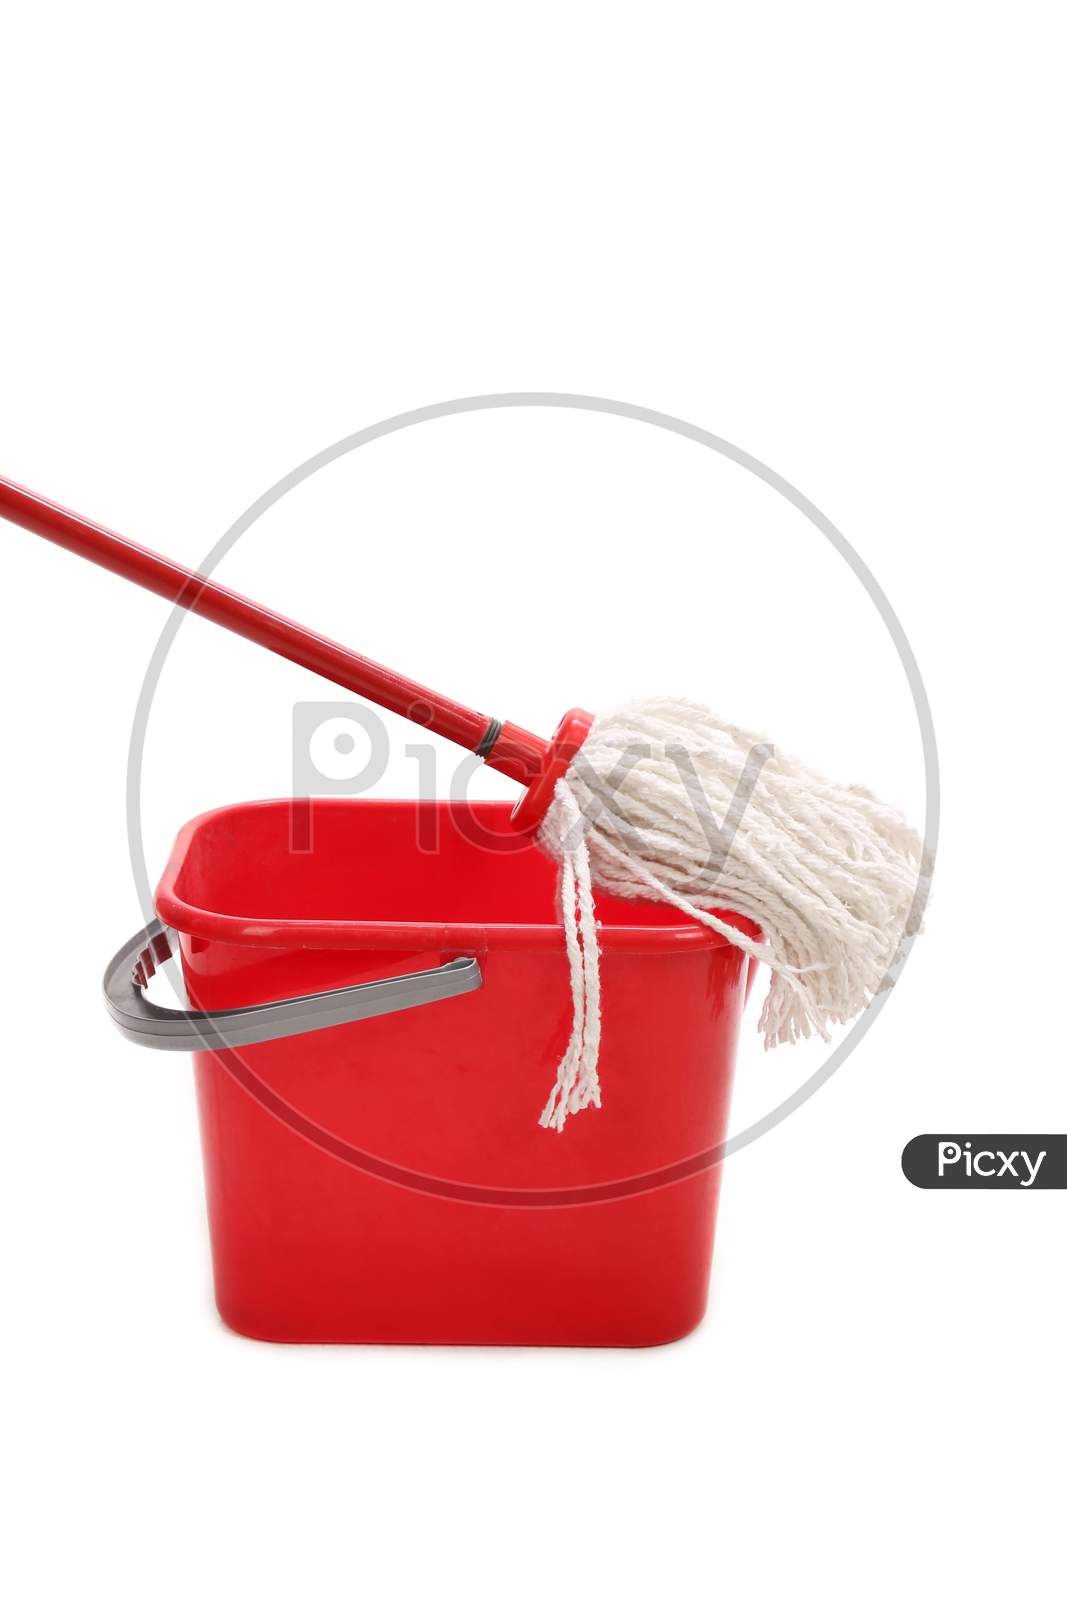 Red Bucket With Cleaning Mop. Isolated On A White Background.